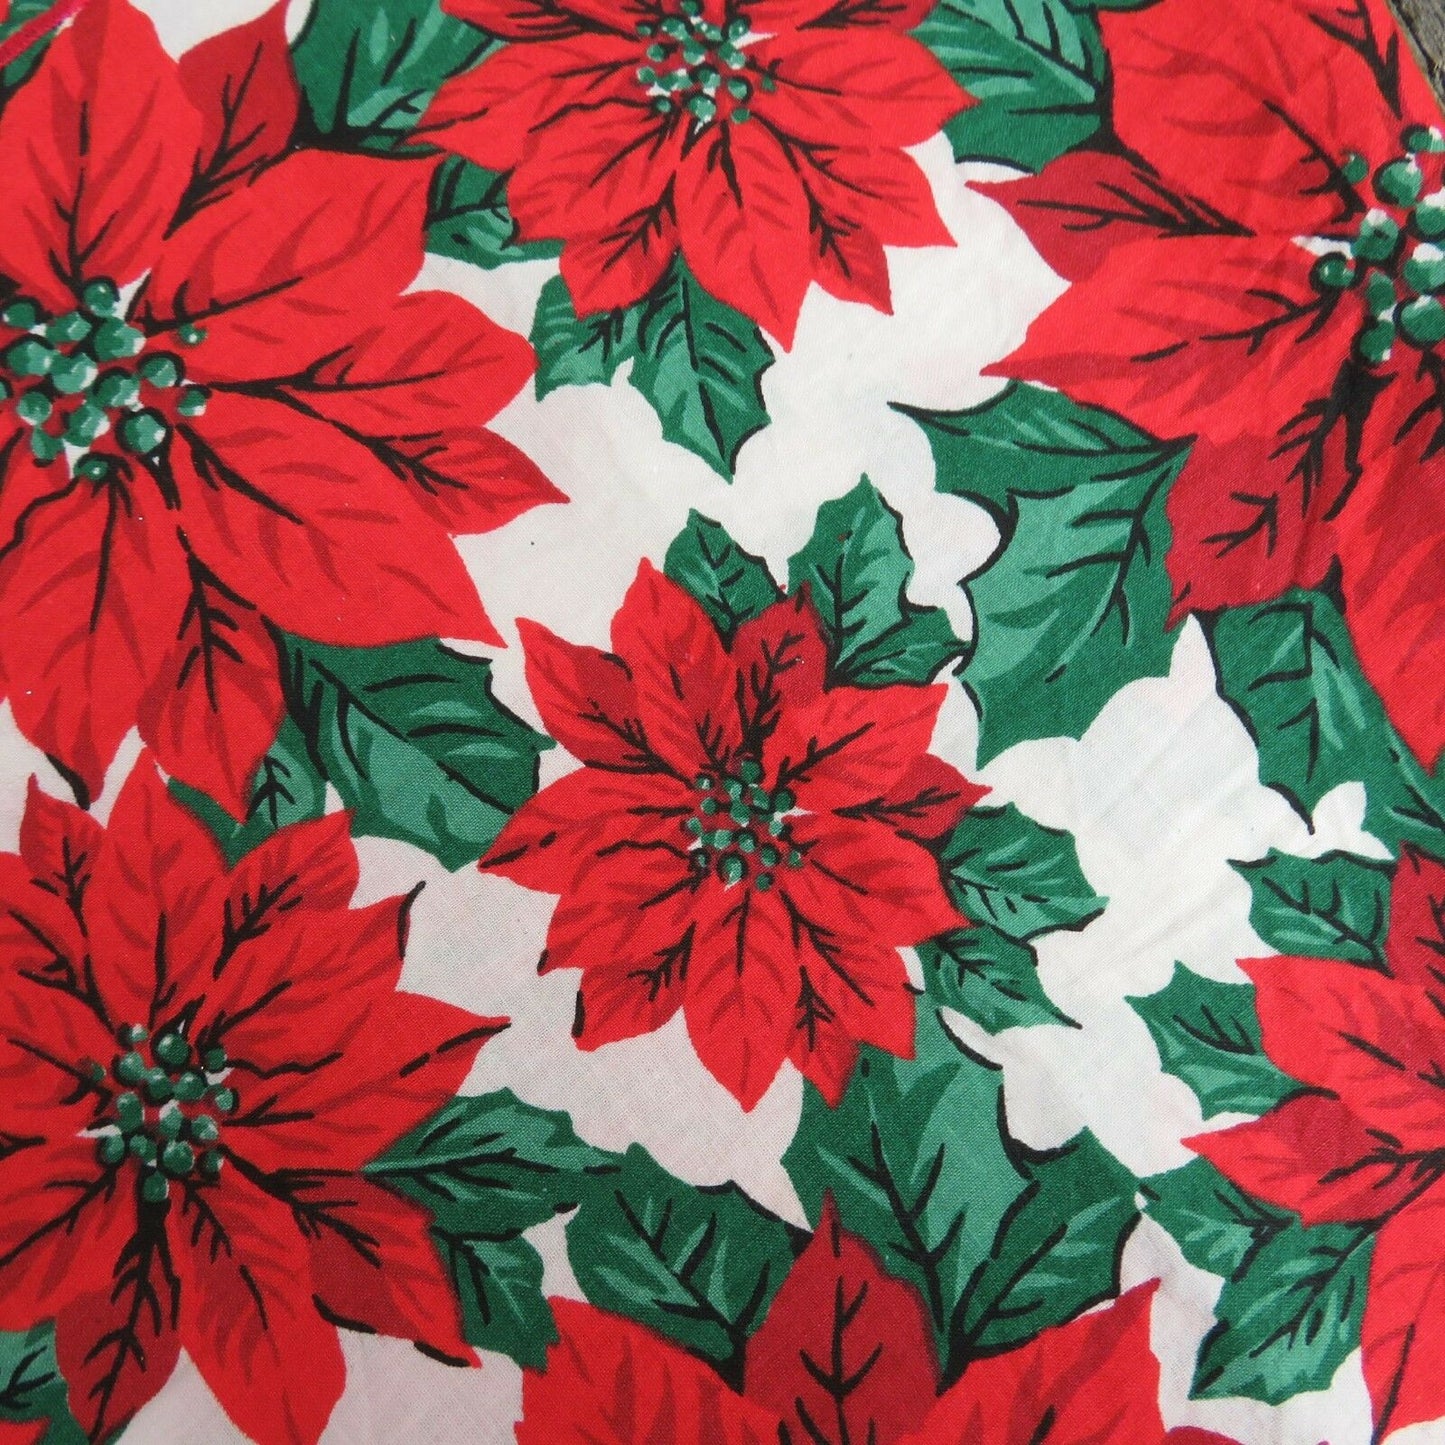 Vintage Holiday Table Runner Fabric Christmas Centerpiece Poinsettia Red Green - At Grandma's Table